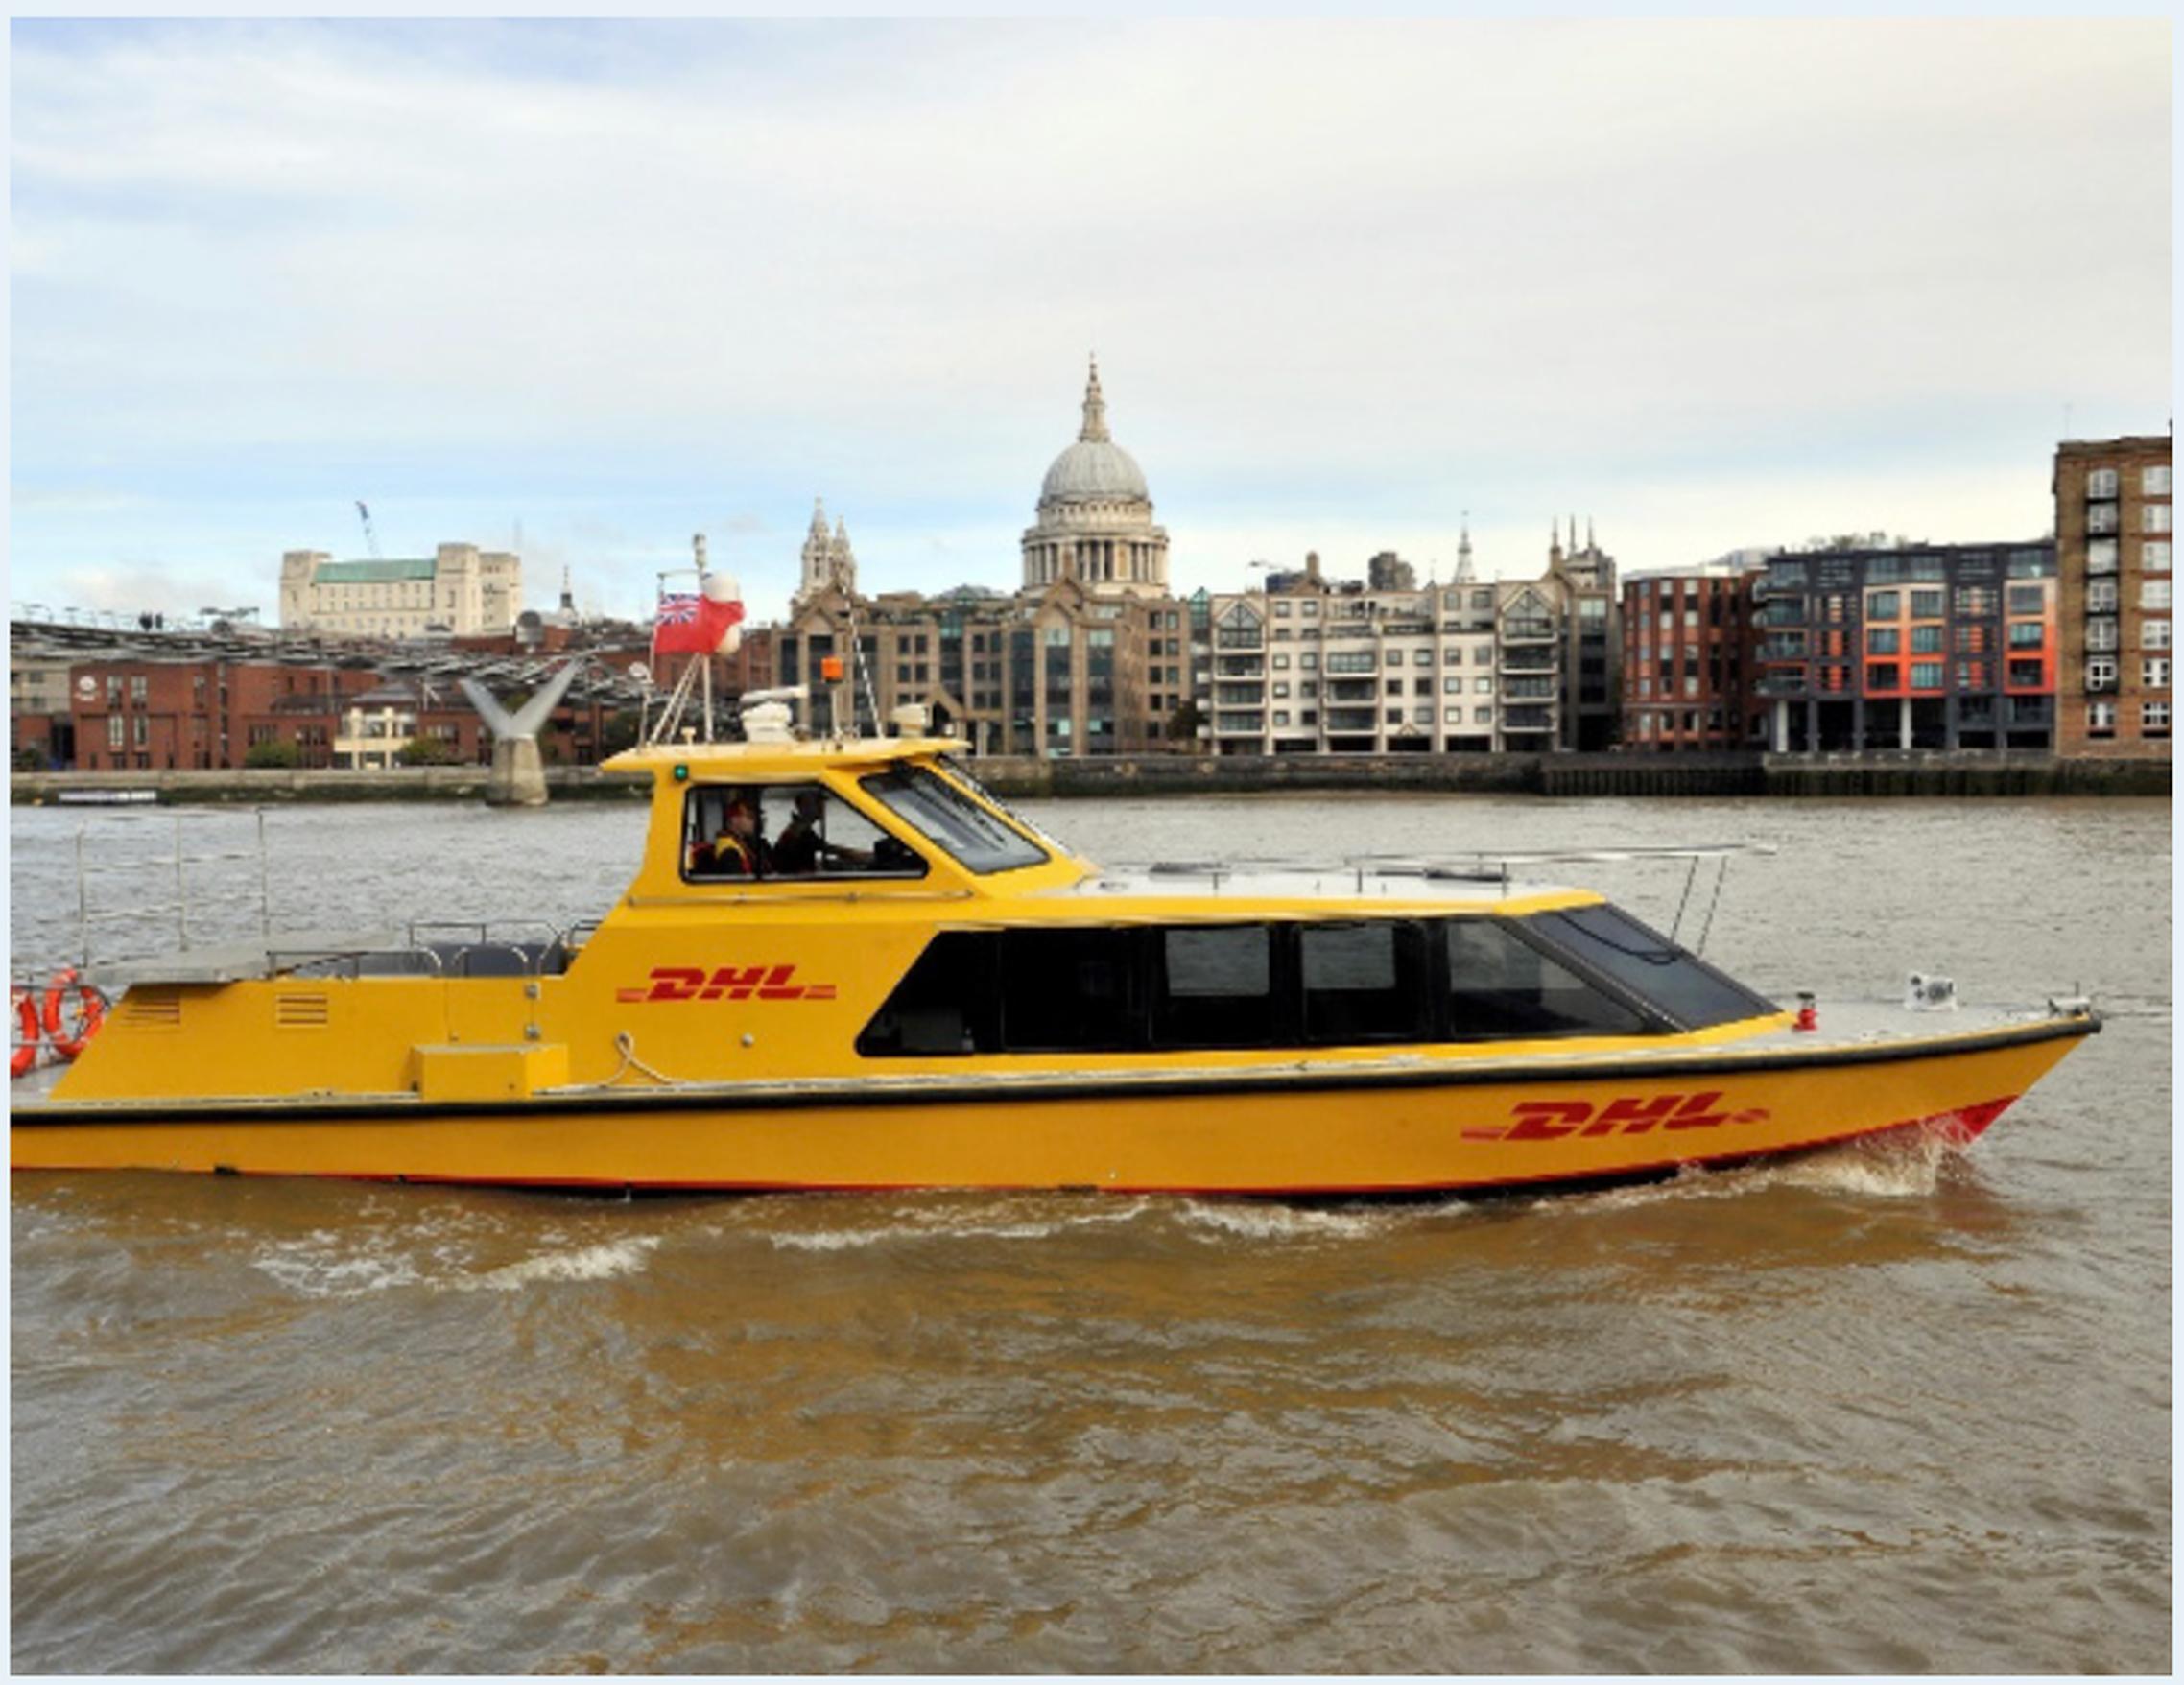 In 2020, DHL launched London’s first riverboat parcel delivery service, working with TfL and the Port of London Authority. The boat is loaded from electric vehicles at Wandsworth Riverside and then travels at high speed into central London, docking at Bankside.